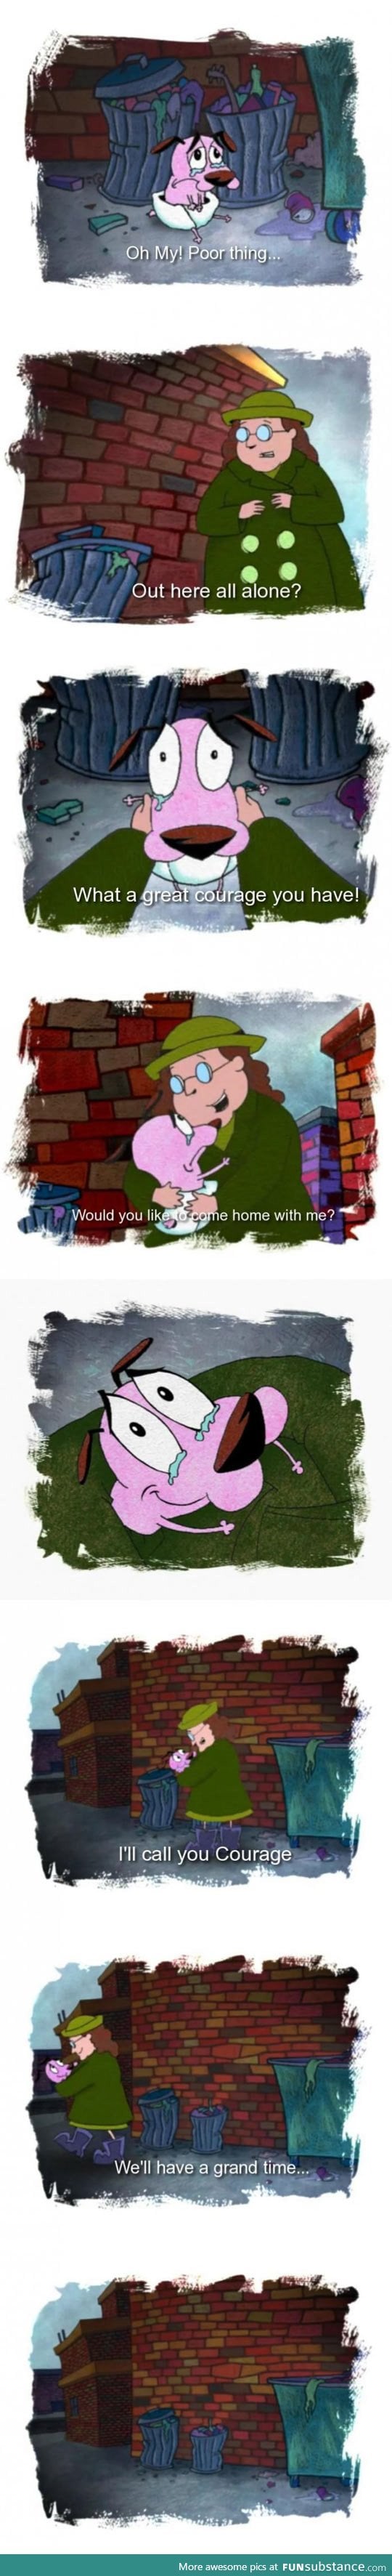 Courage the cowardly dog origins